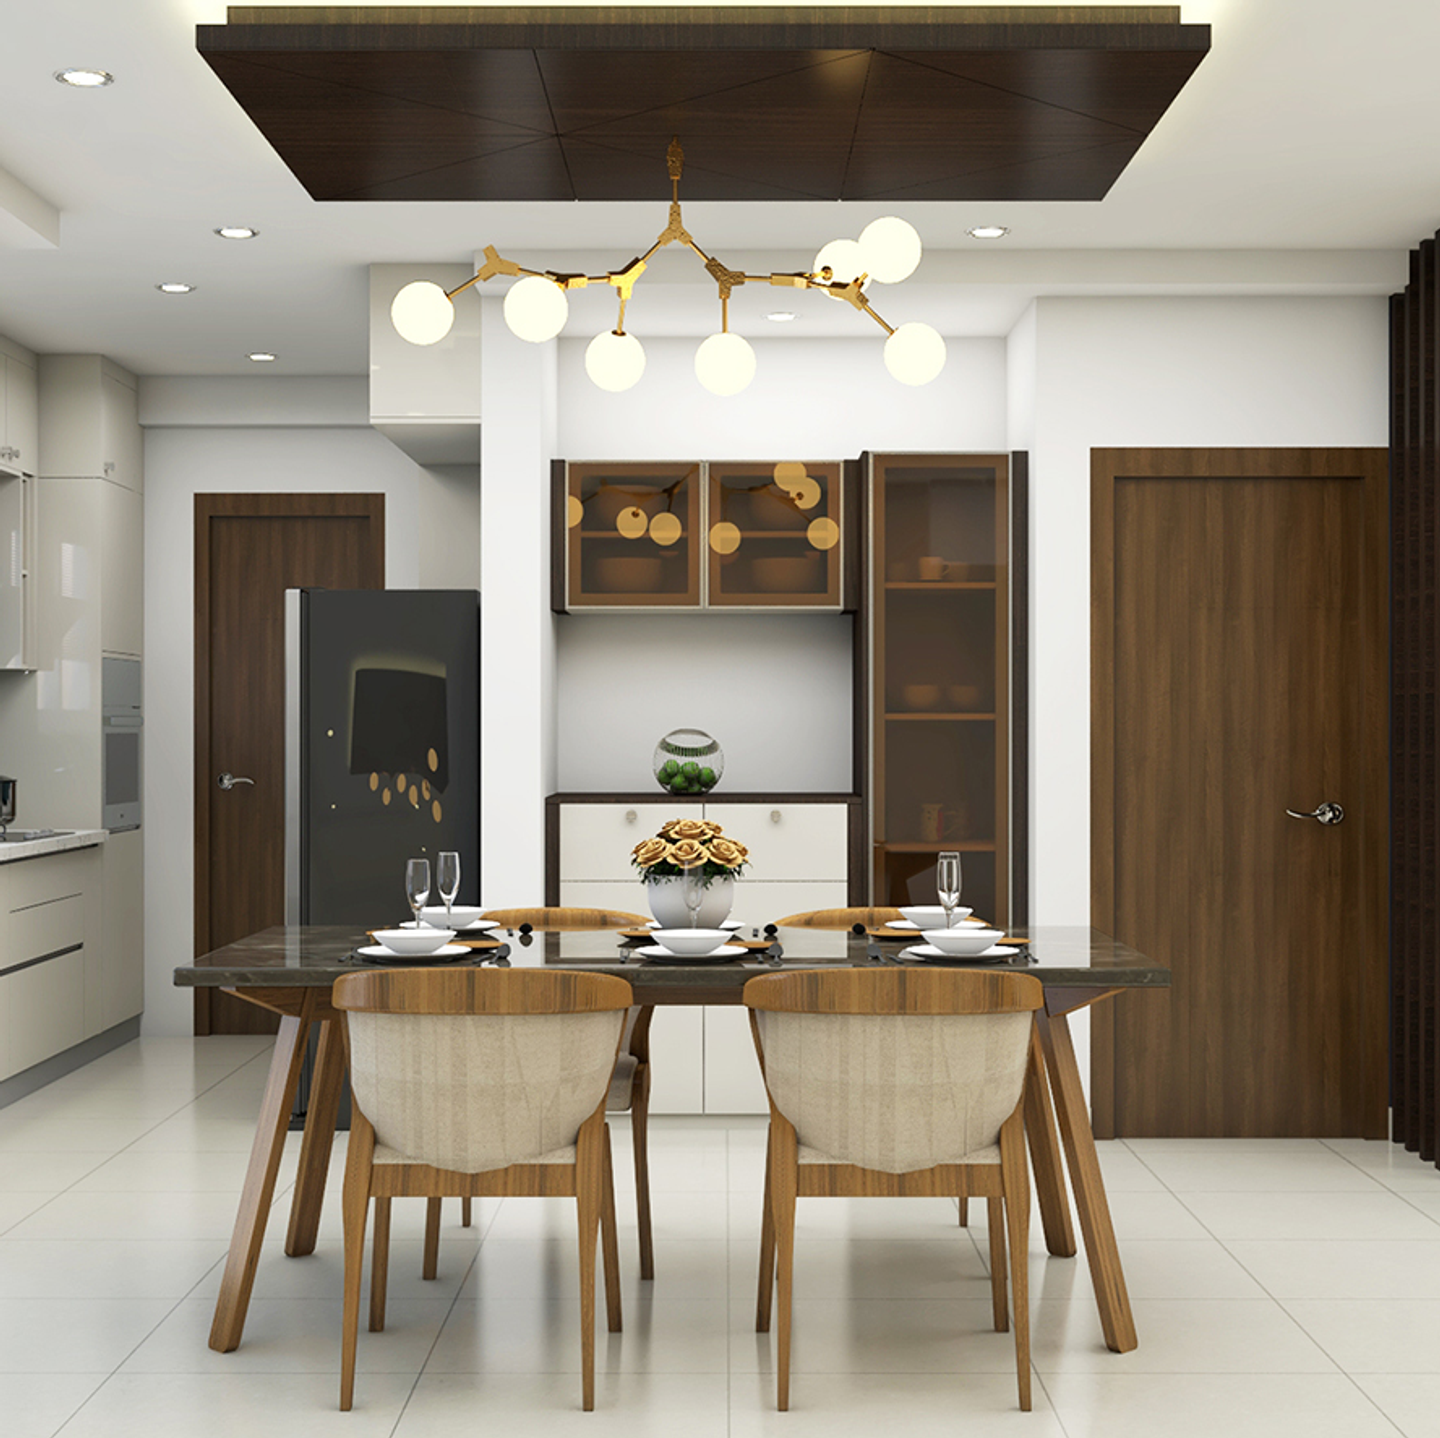 Modern Spacious 4-Seater Dining Room Design Idea with Crockery Unit - Livspace